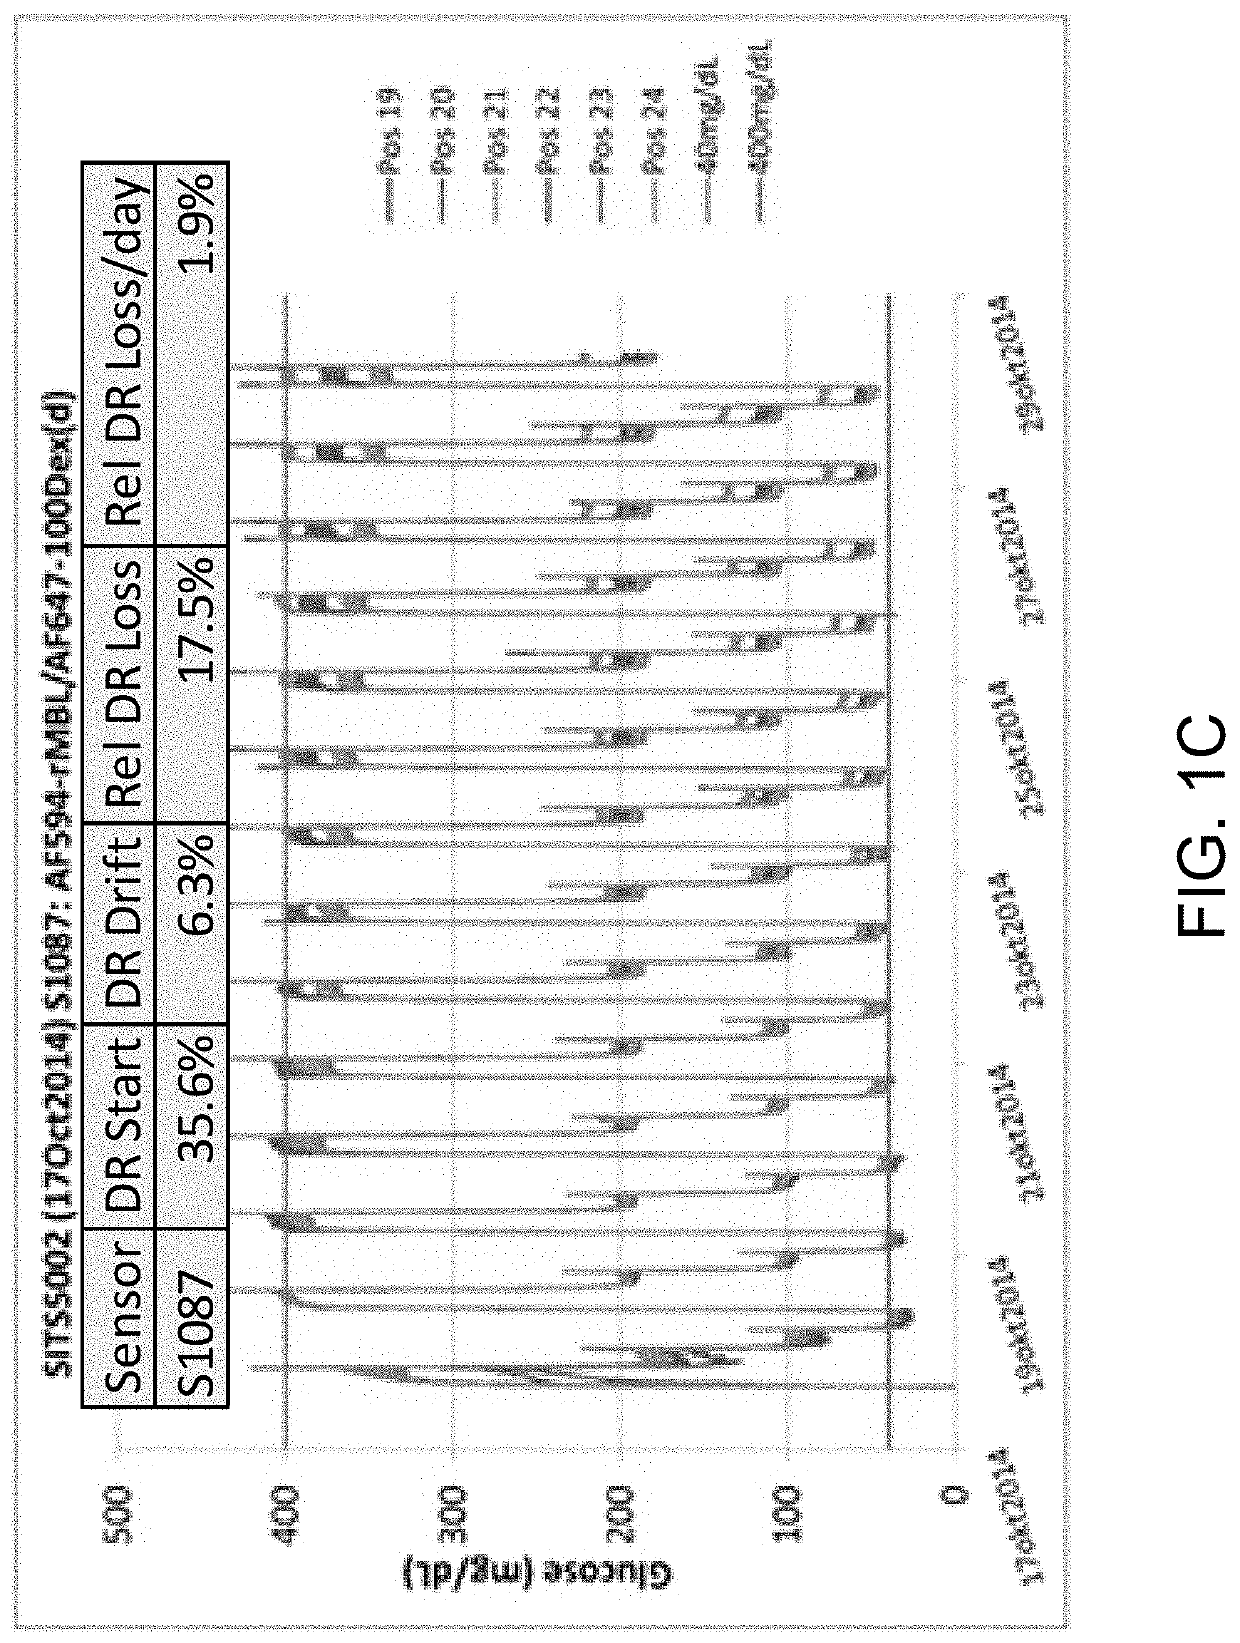 Modified-dextrans for use in optical glucose assays